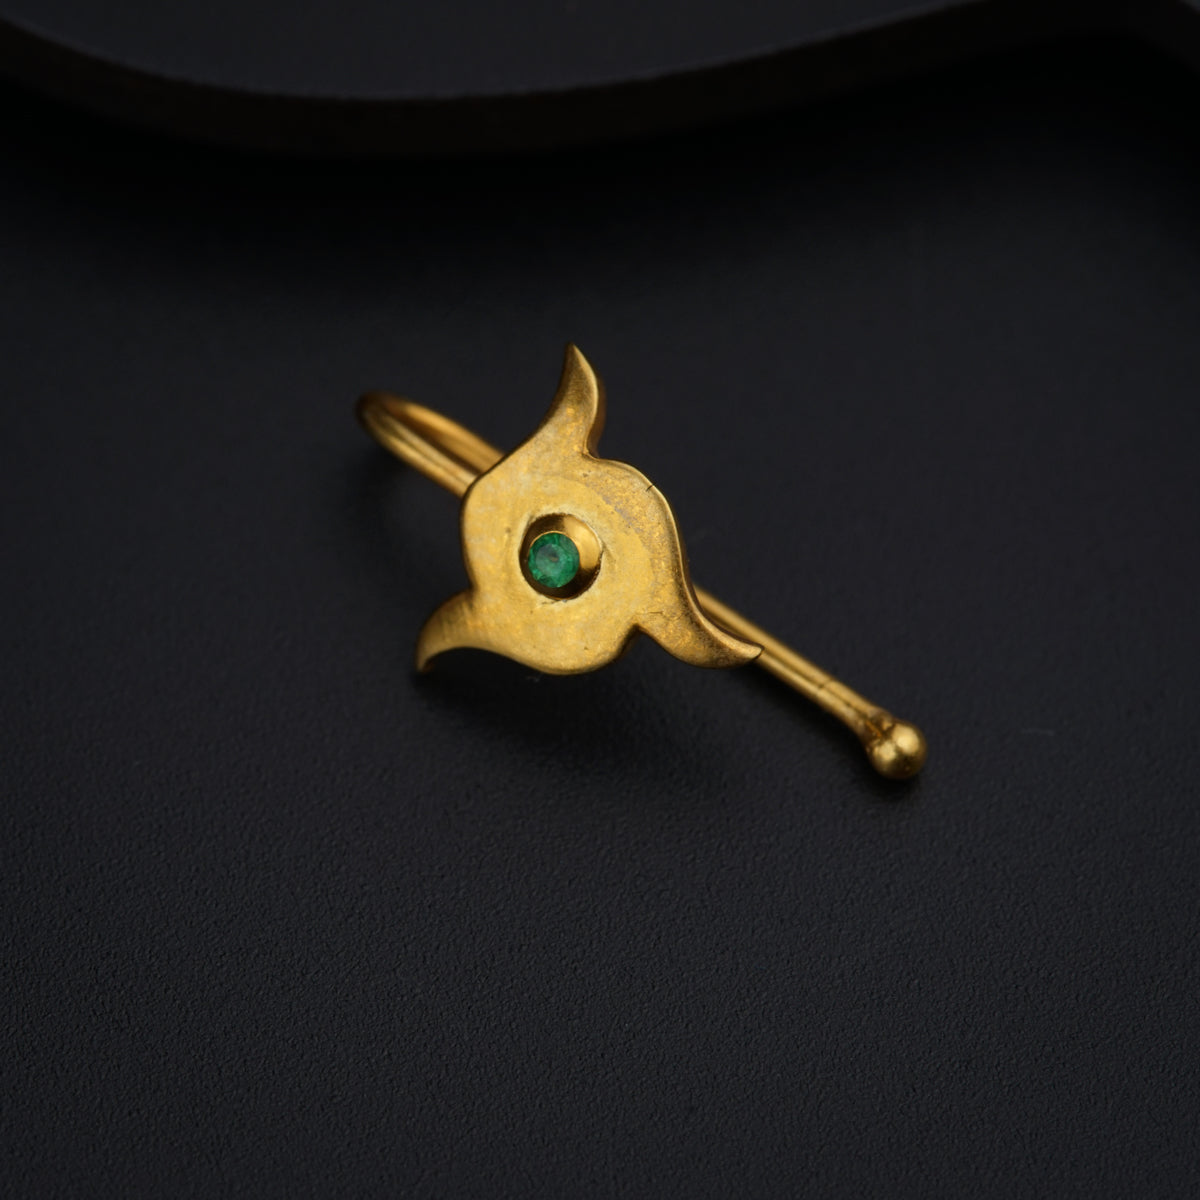 a gold brooch with a green stone in the middle